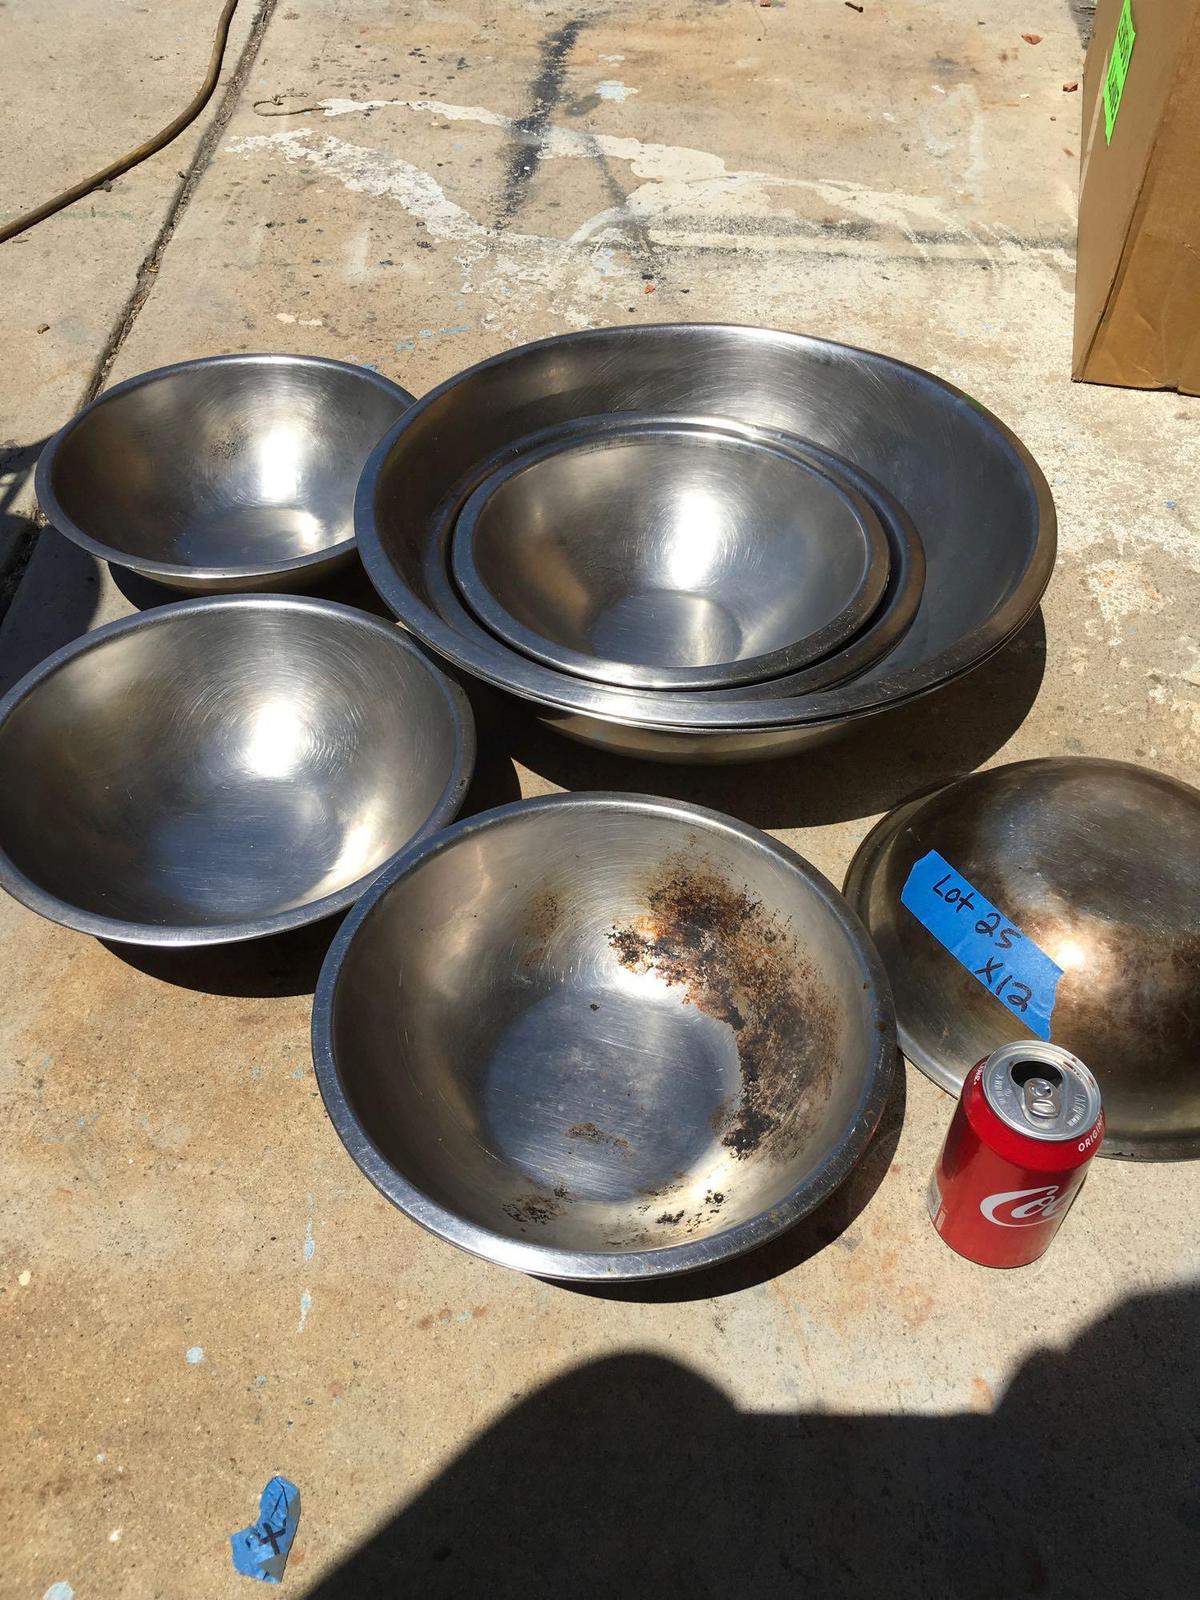 S/S bowls, Assorted sizes ( 18", 12", 9" )